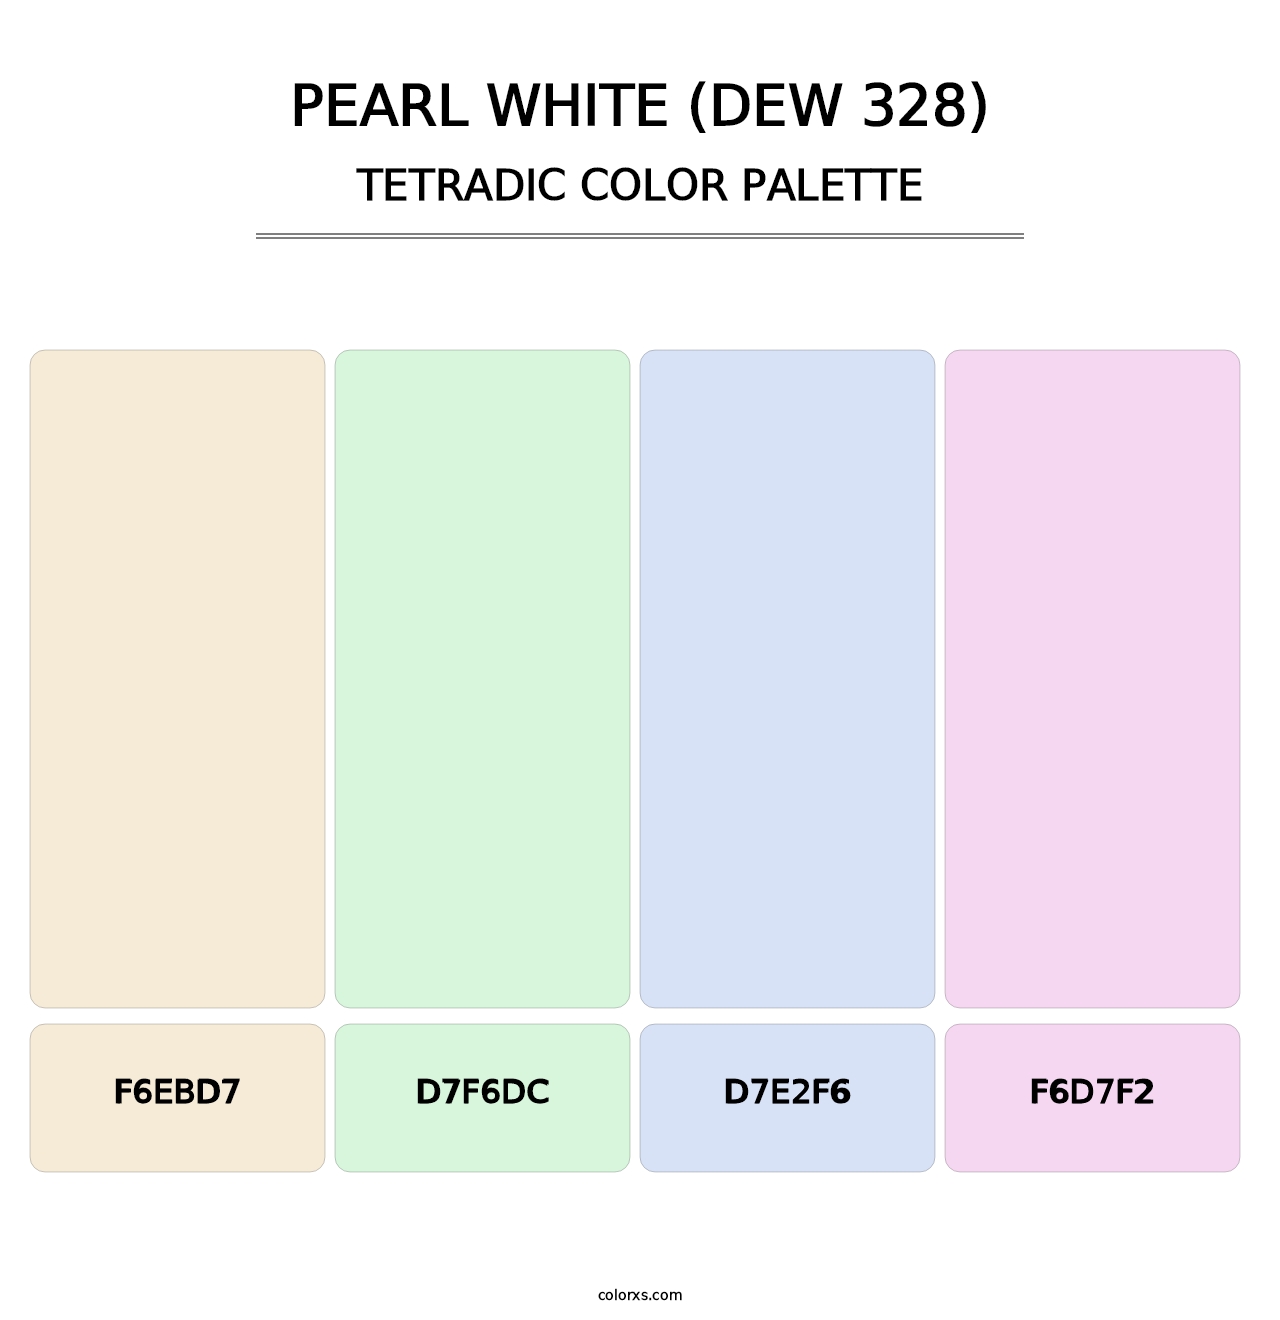 Pearl White (DEW 328) - Tetradic Color Palette